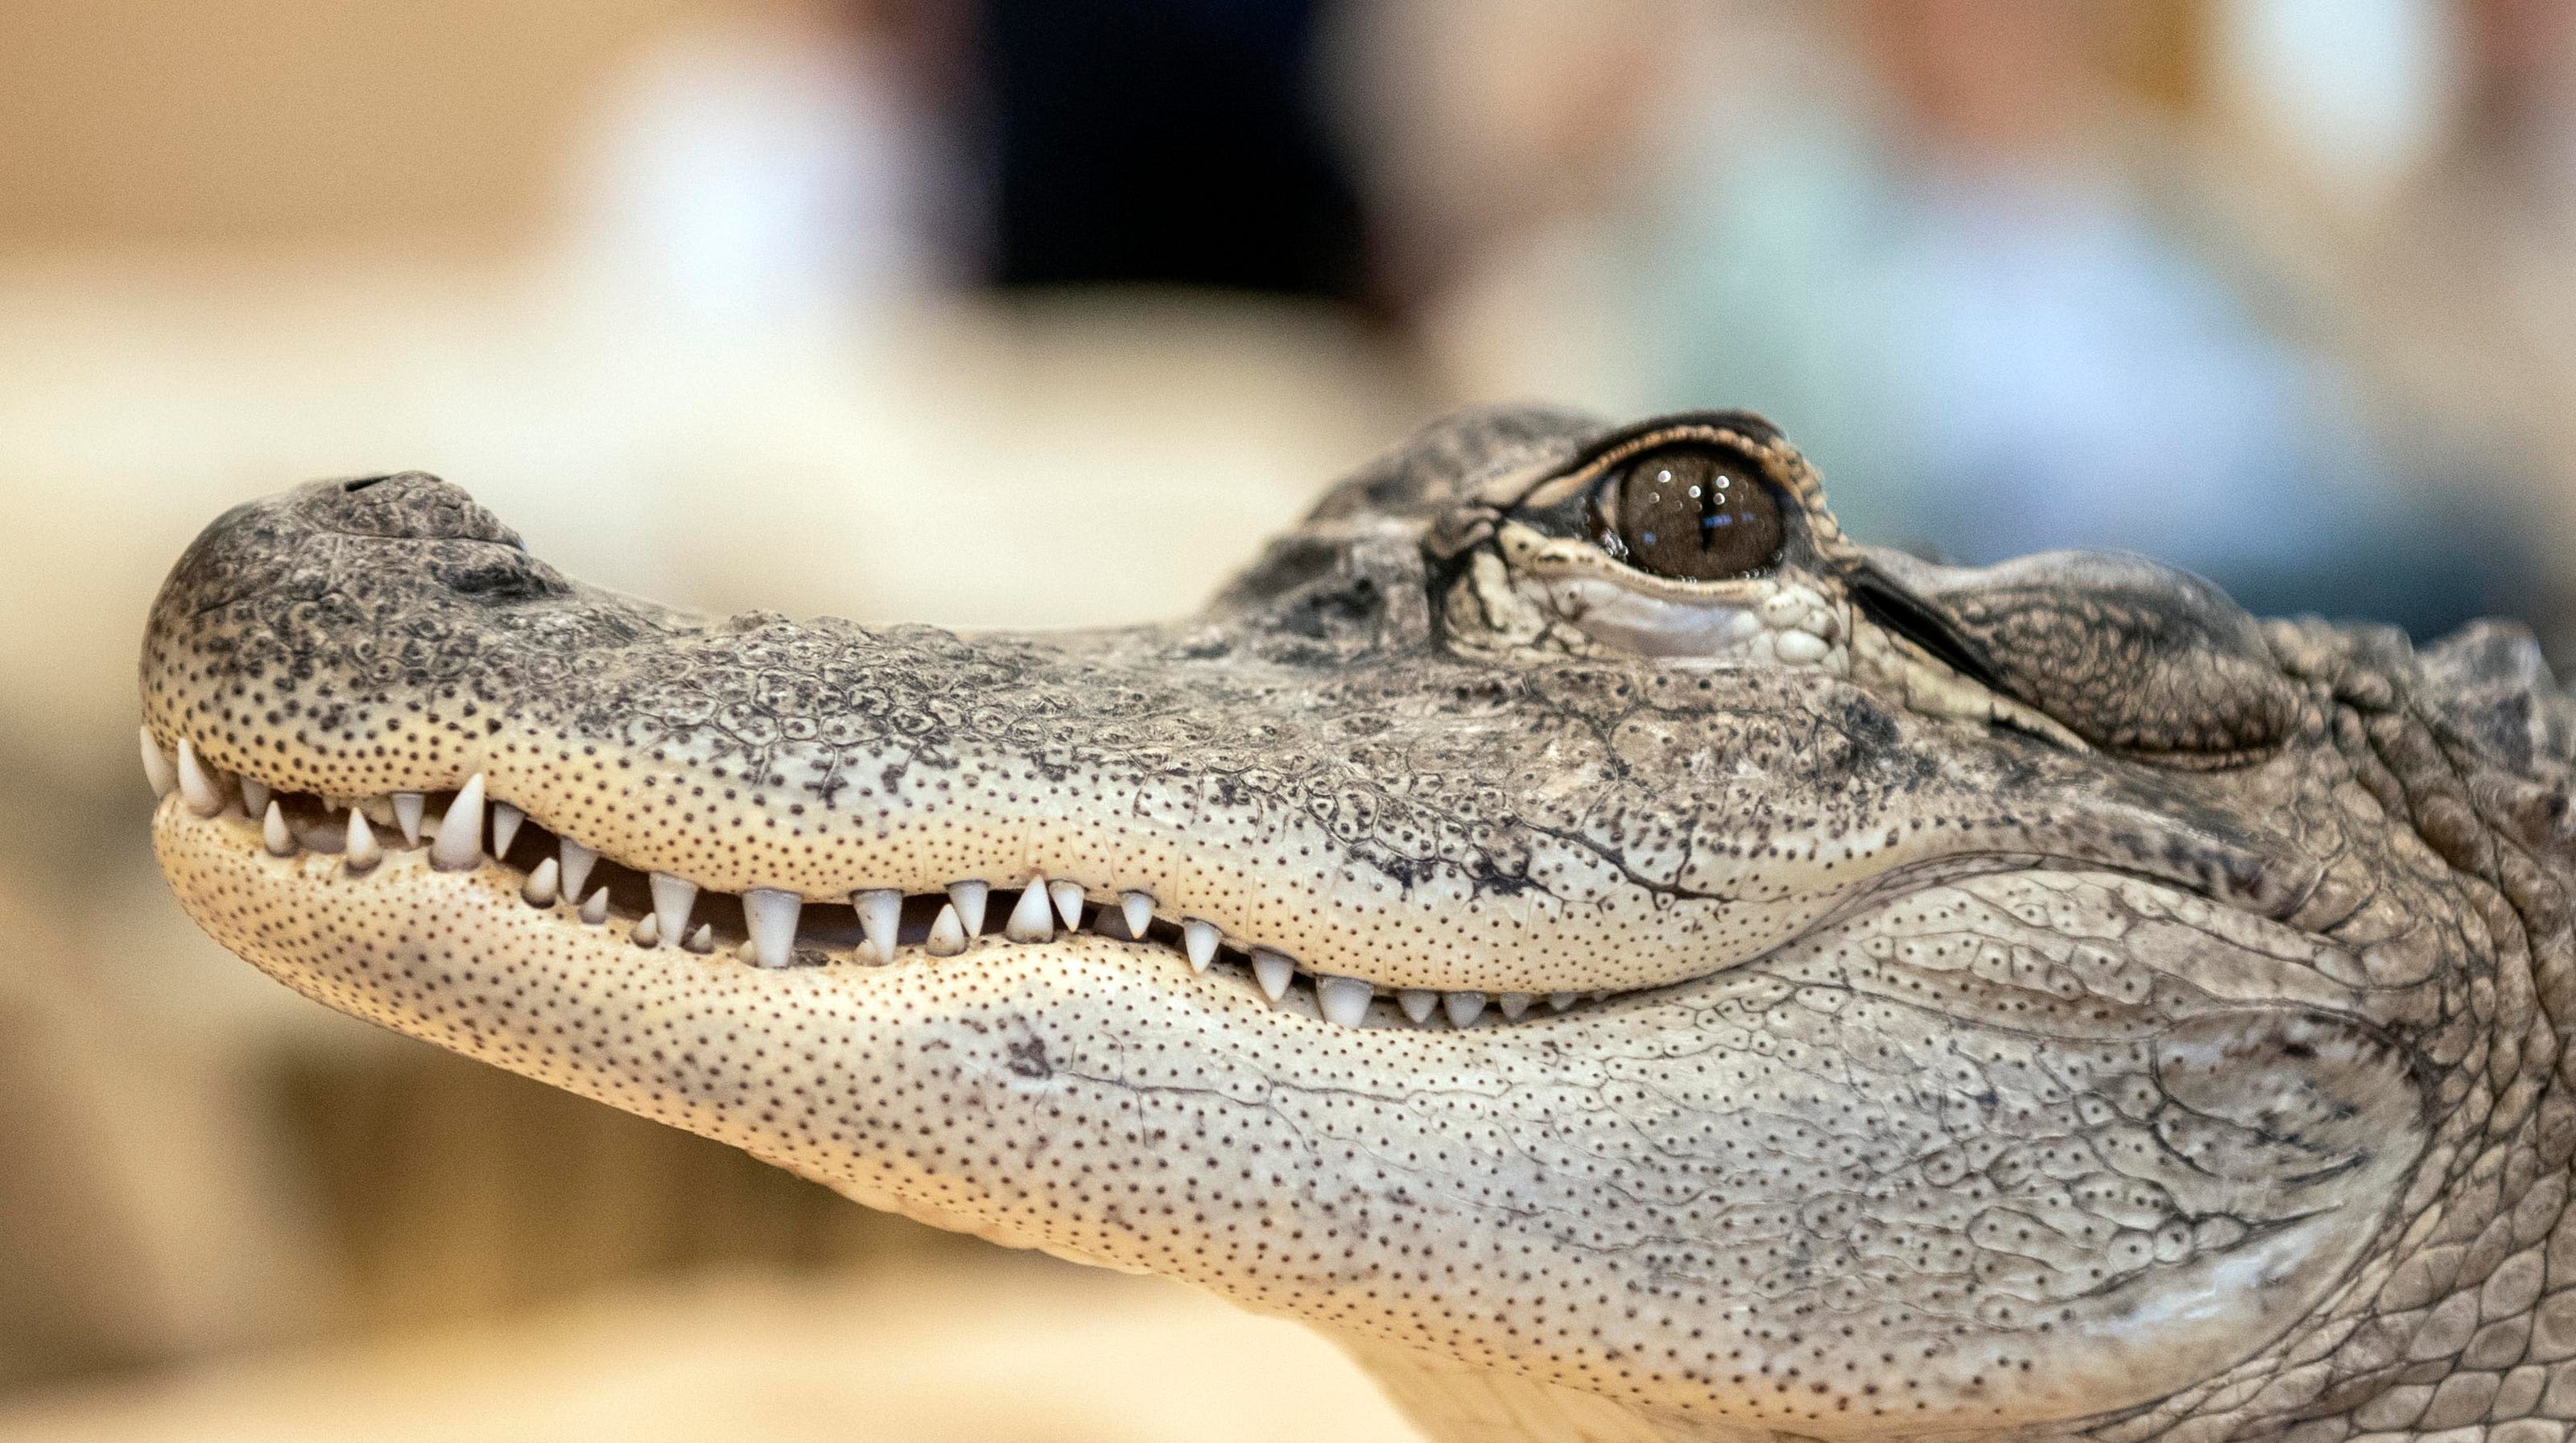 Wally gator's owner offers a reward for the return of his emotional support alligator